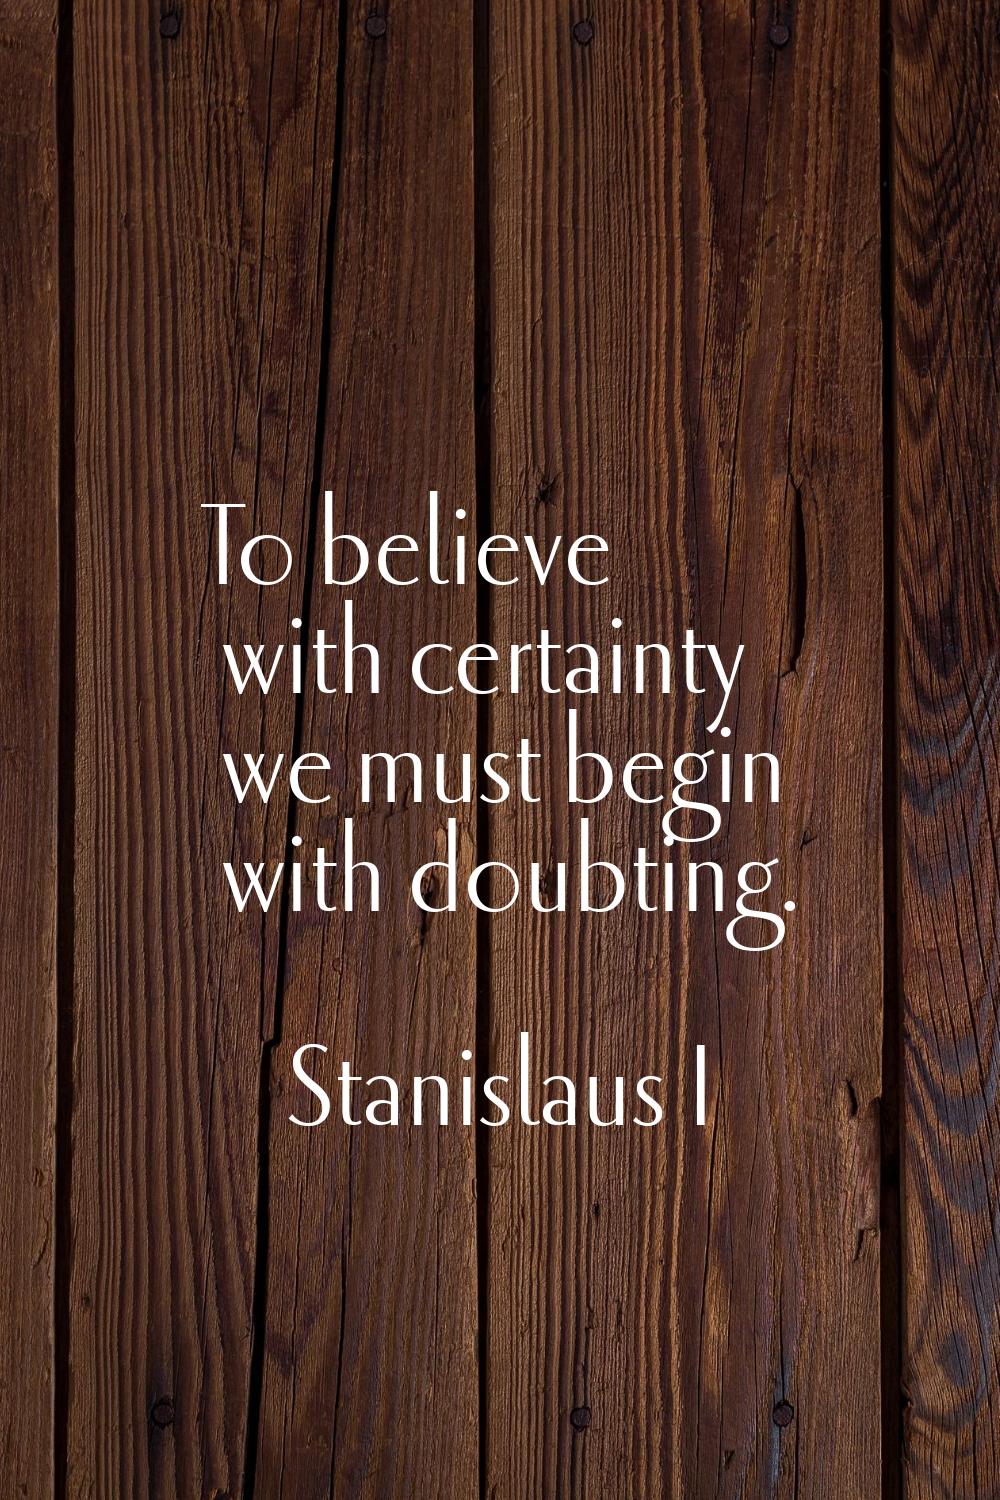 To believe with certainty we must begin with doubting.